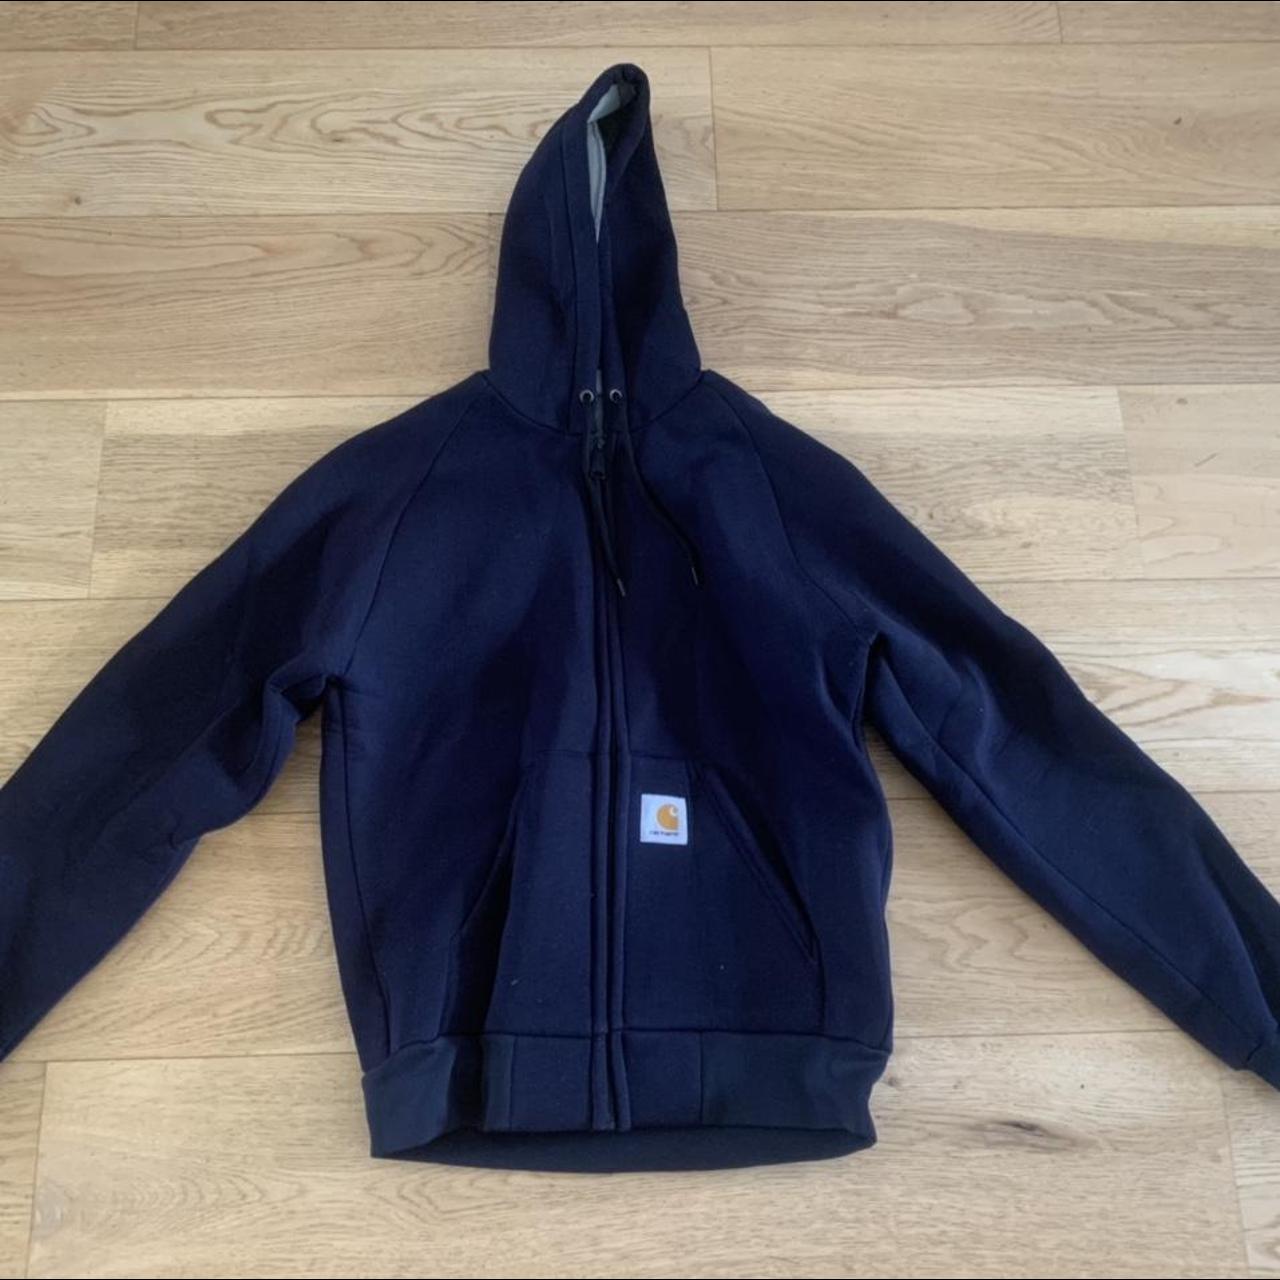 More pictures of the carharrt hooded jacket - Depop